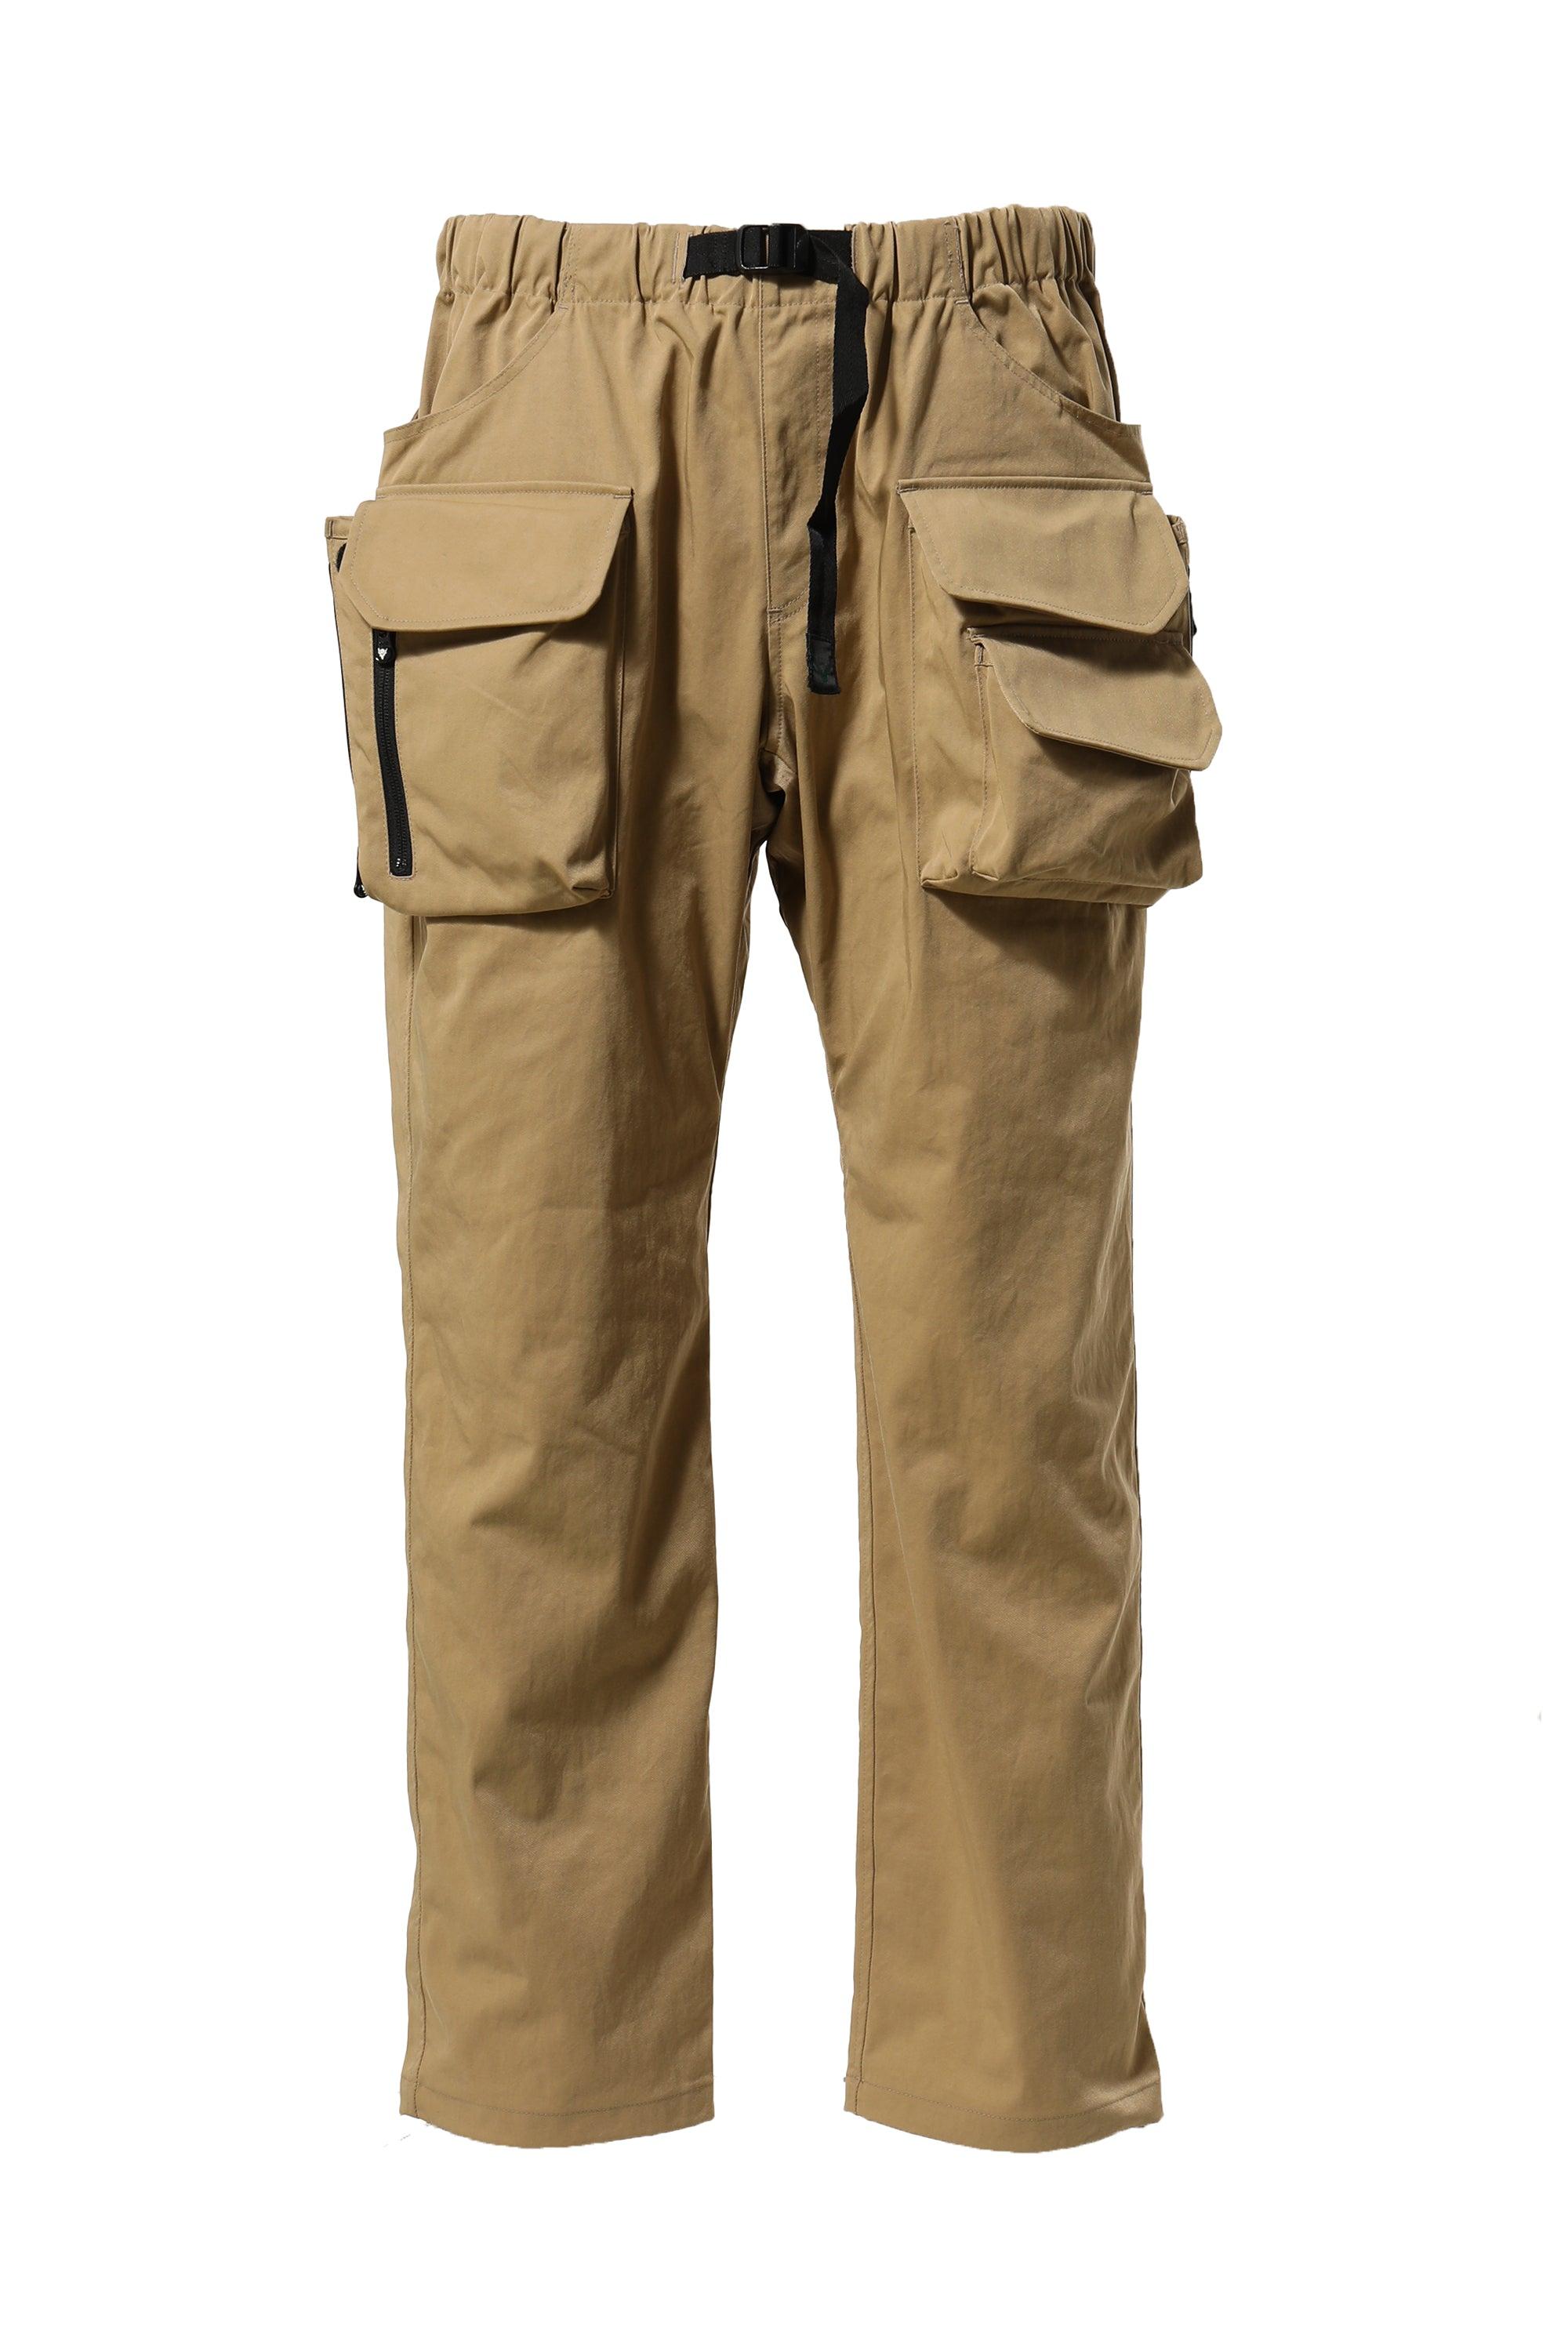 South2 West8 Tenkara Trout Pant - Nylon Twill in Natural for Men | Lyst